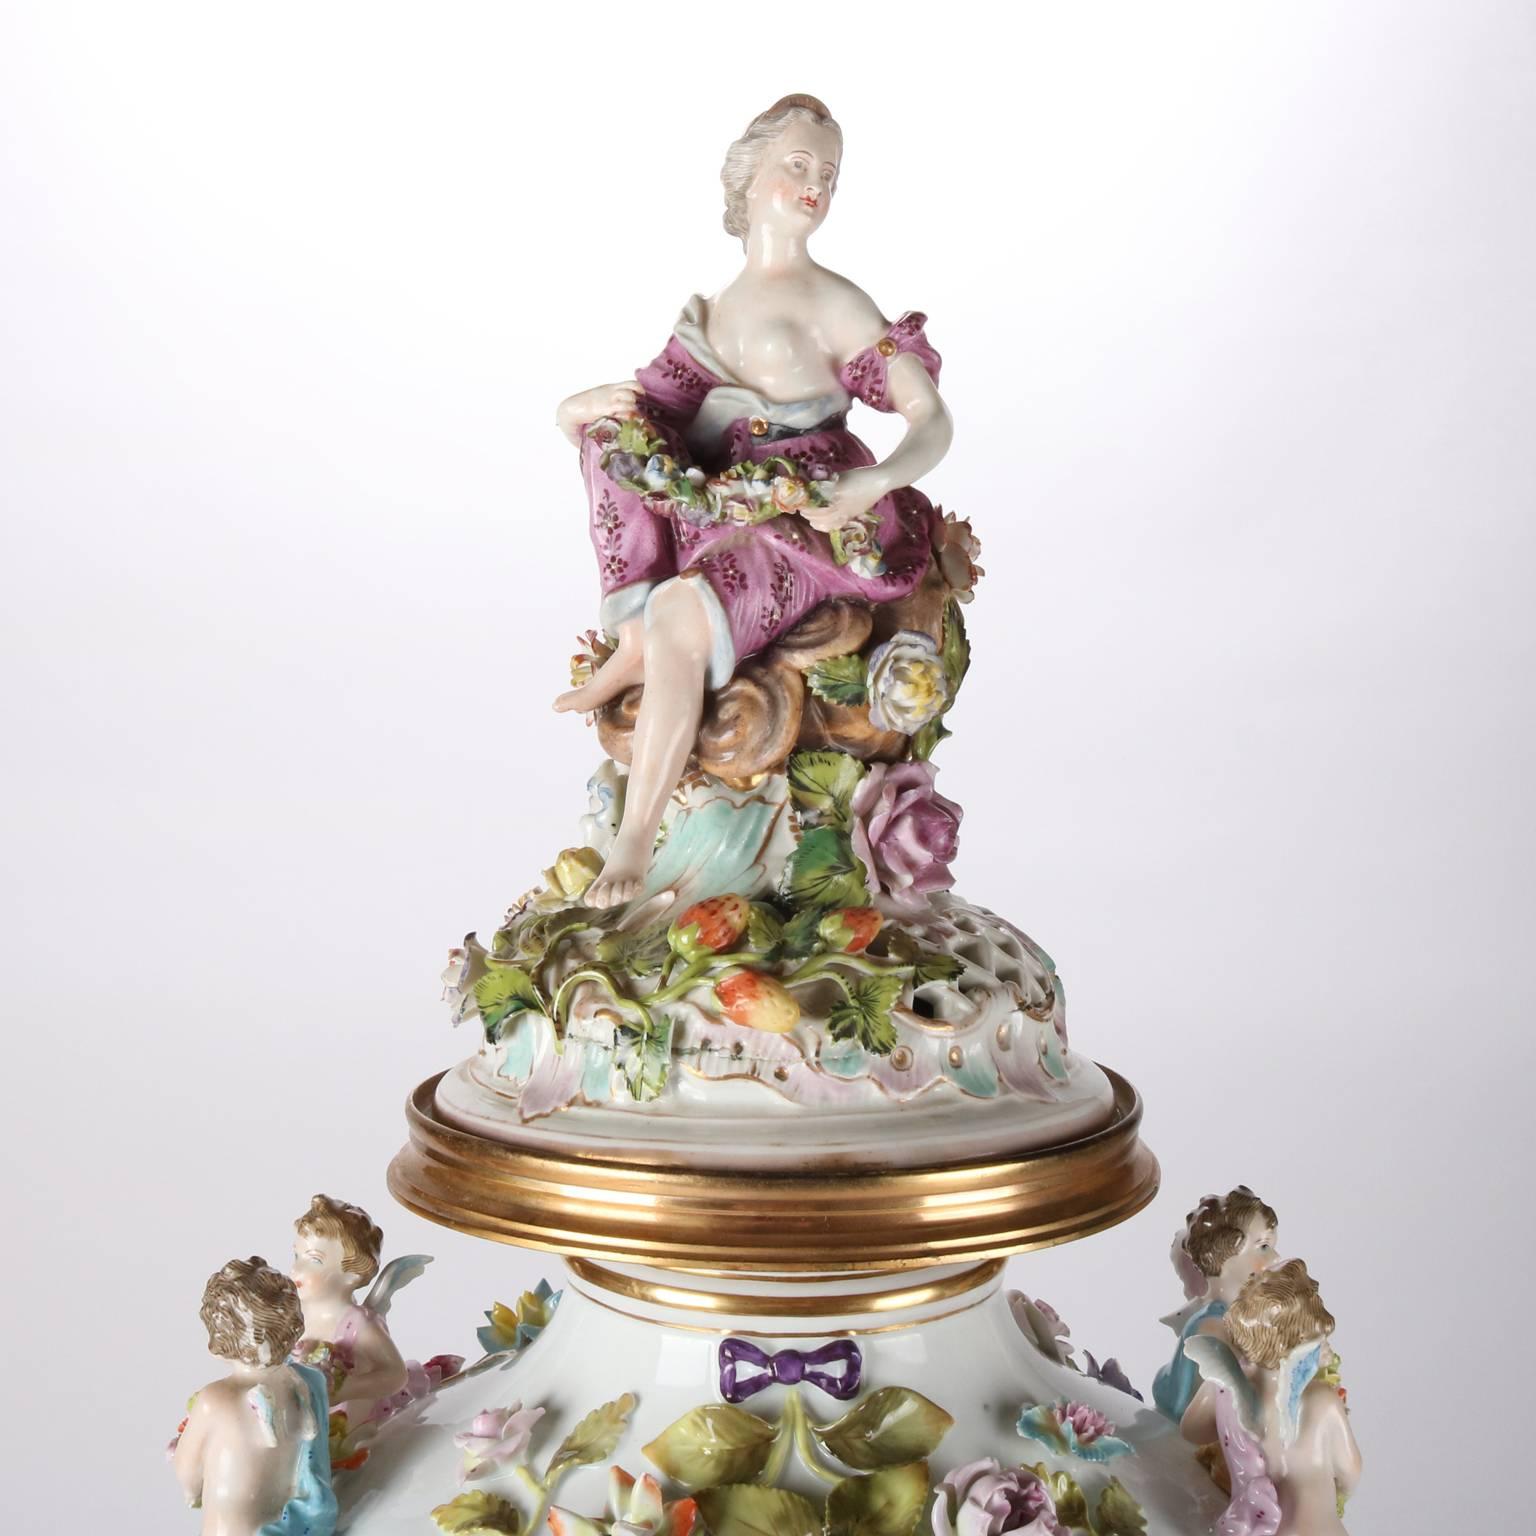 Monumental antique German Dresden figural porcelain urn features hand-painted reserve with courting scene, cherub handles, woman form finial, allover floral and foliate decoration, 19th century.

Measures - 30"H x 13.5"diam.